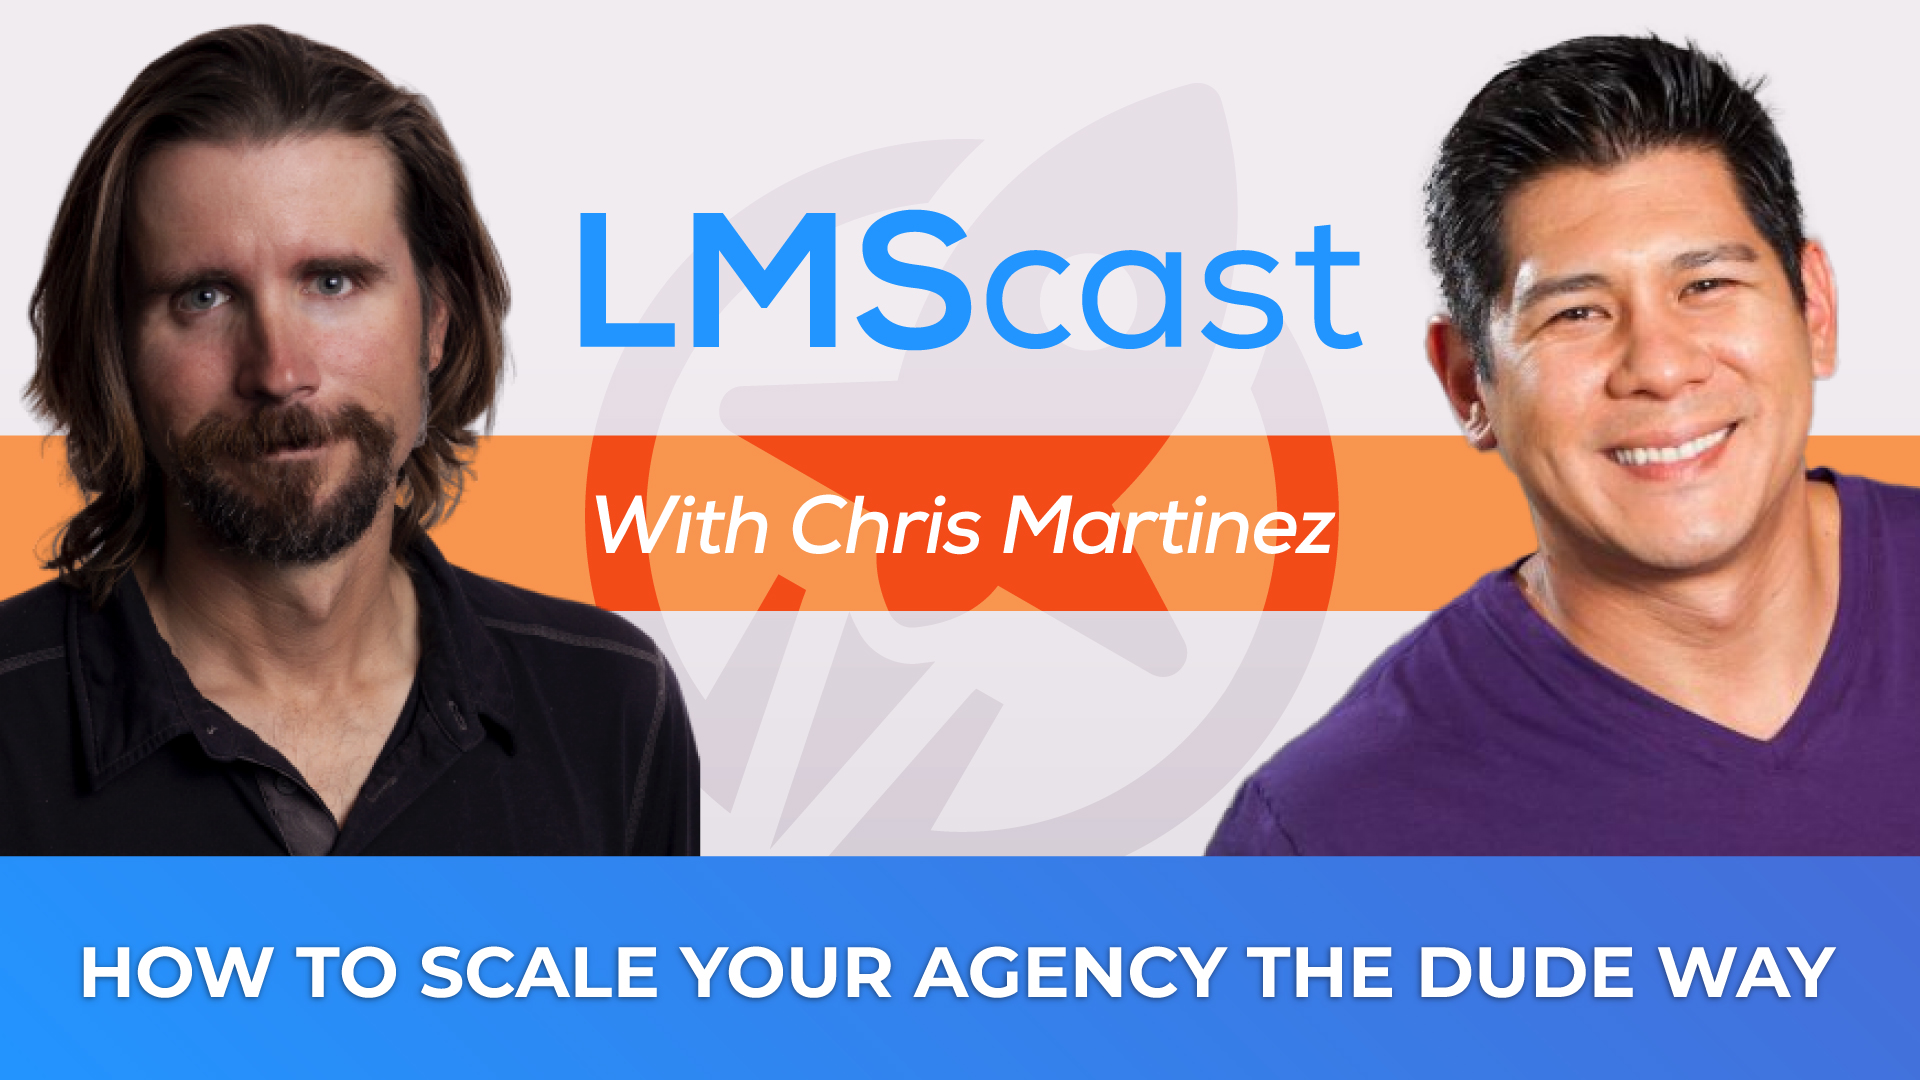 How to Scale Your Agency the Dude Way with Chris Martinez